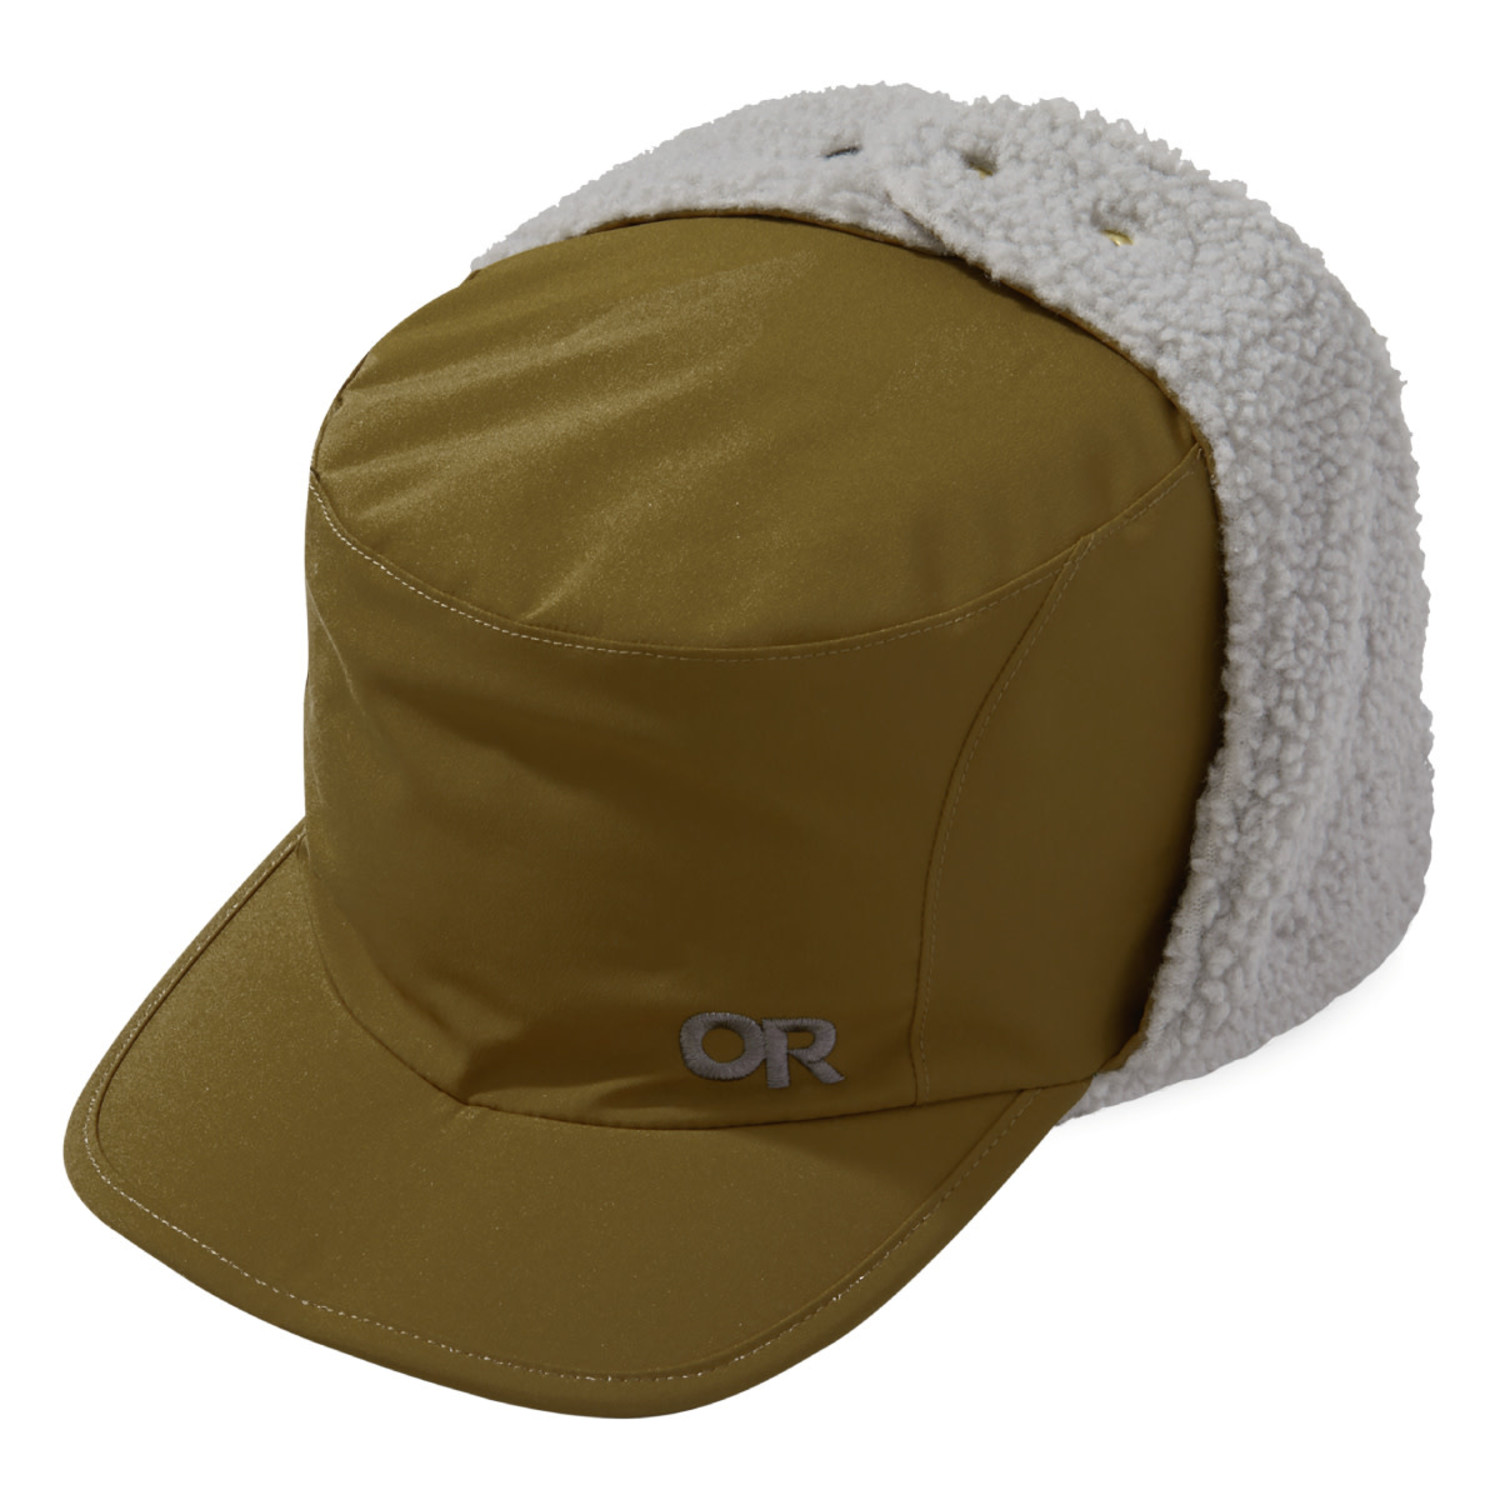 Outdoor Research Whitefish Hat - Saddle, L